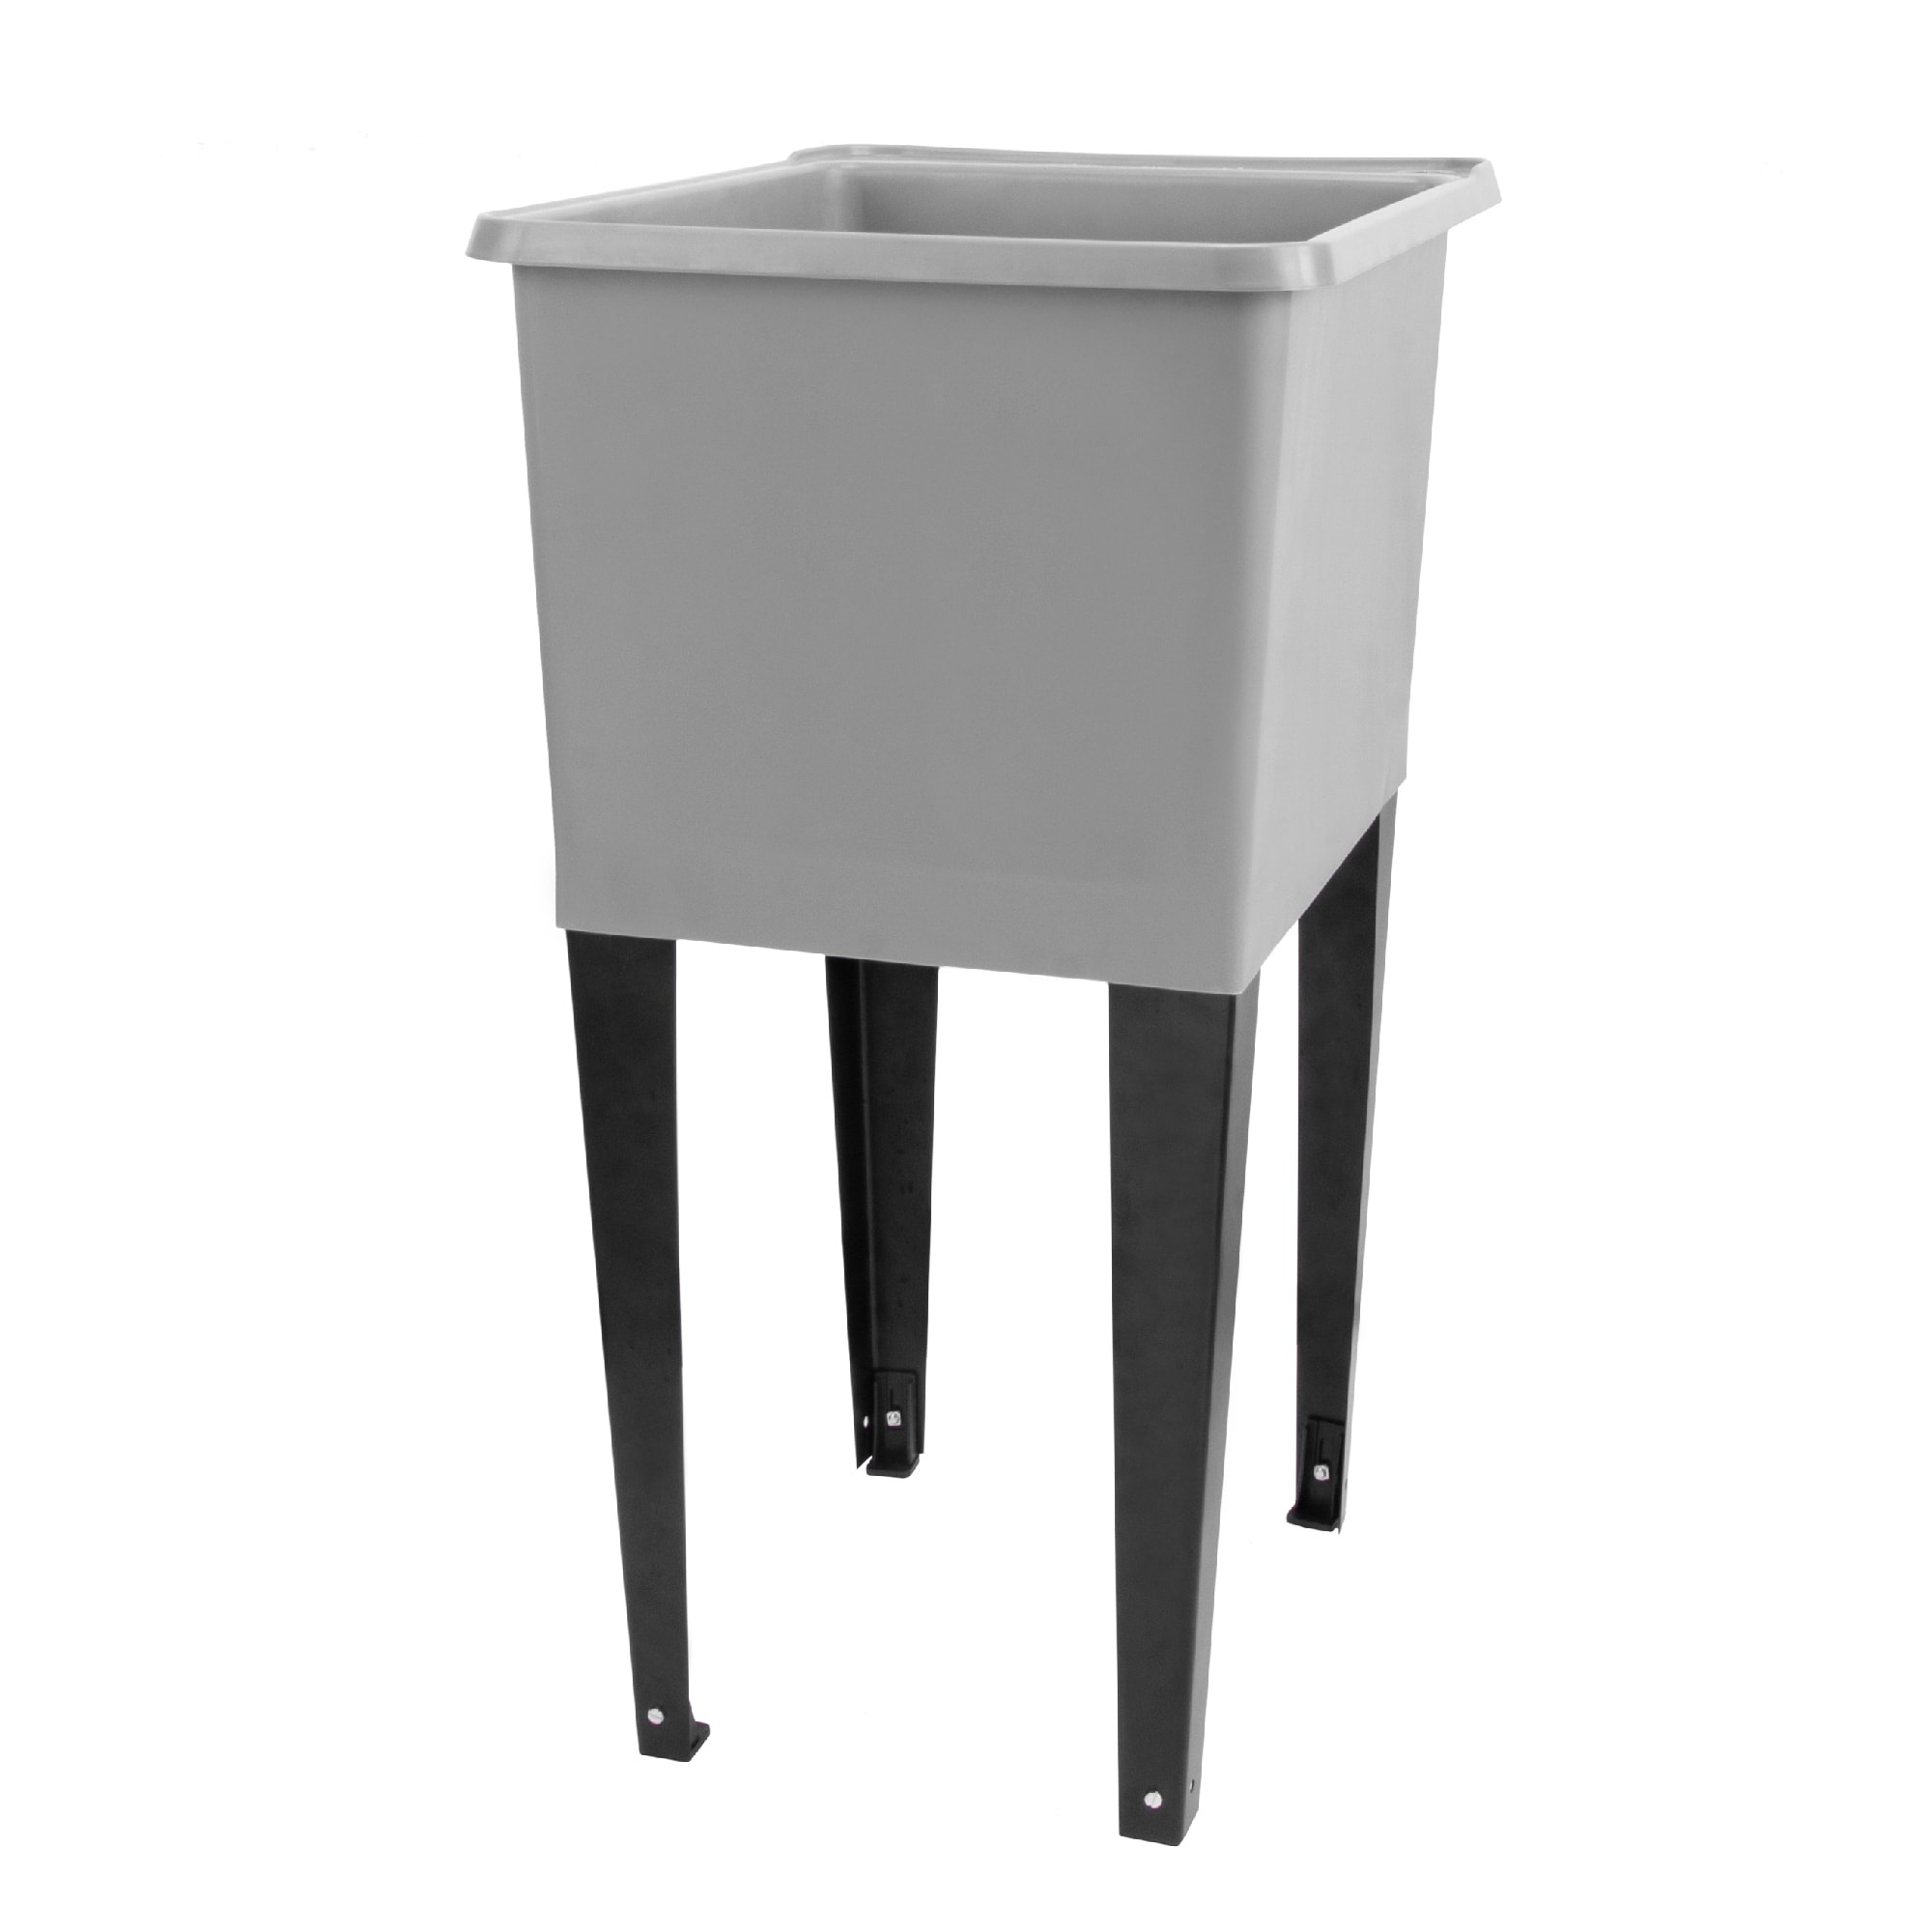 https://ak1.ostkcdn.com/images/products/is/images/direct/e9cfc6bb1593cd971fa937ef56cee11b3cbf9beb/TEHILA-16-Gallon-Space-Saver-Utility-Sink-17.75-in.-W-Laundry-Tub%2C-with-Drainage-Kit.jpg